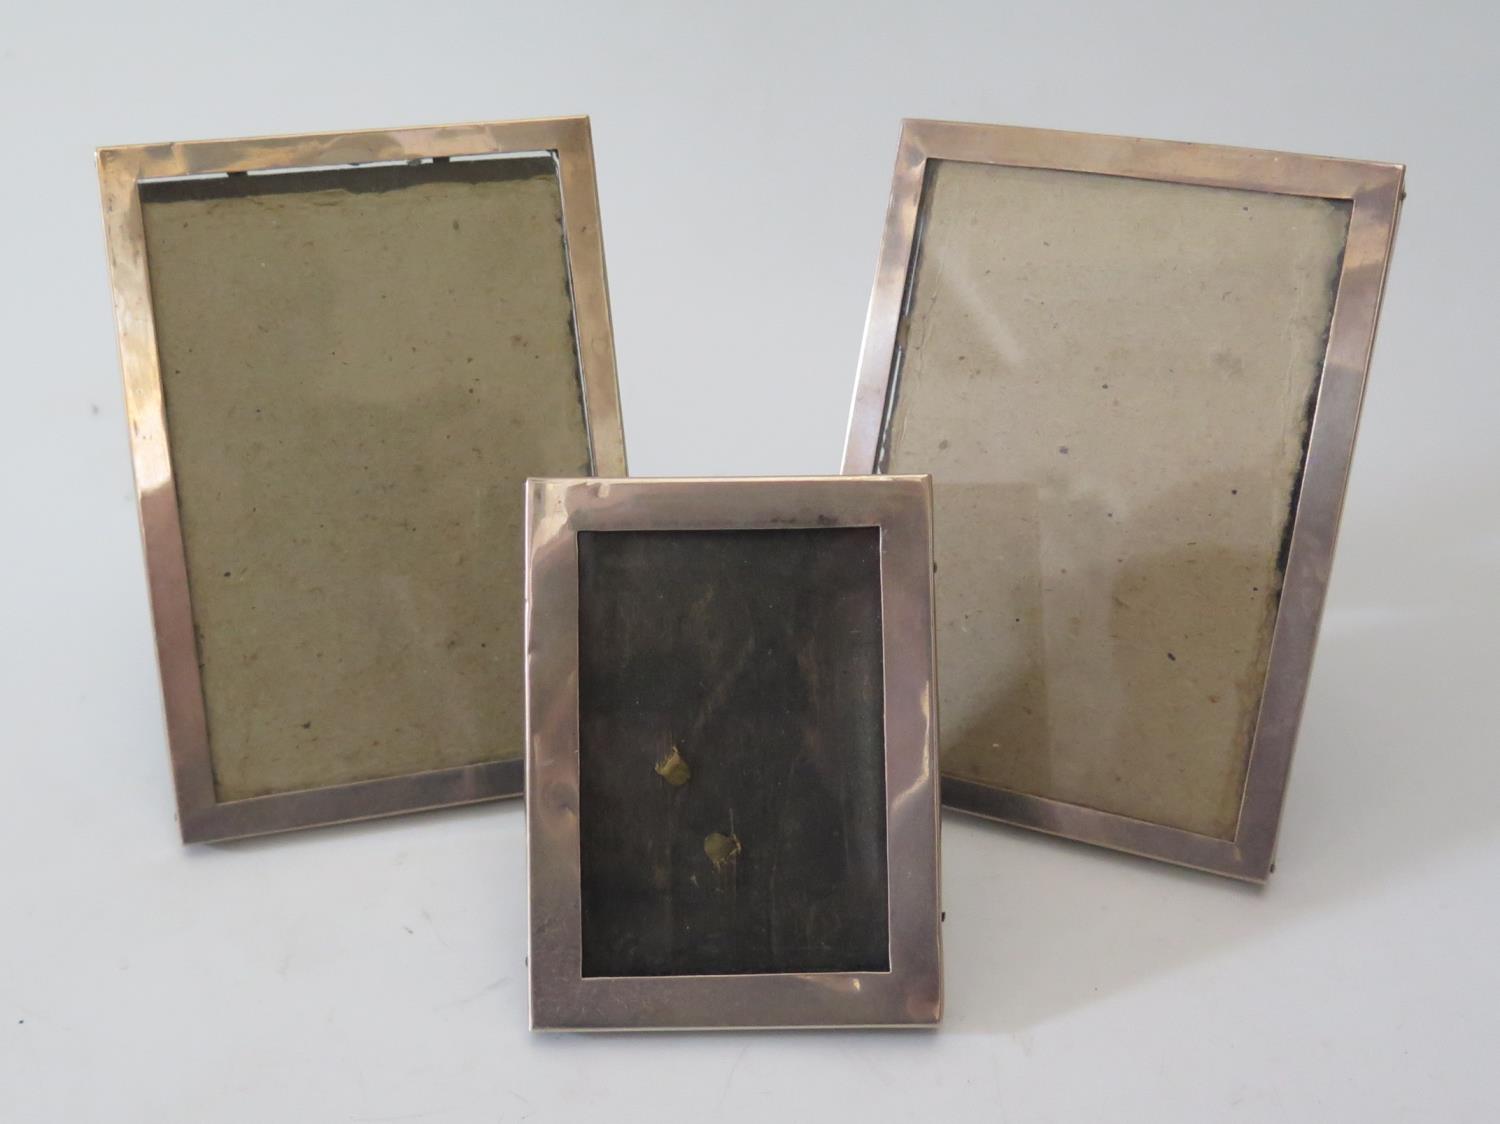 A Pair of George V Silver Photograph Frames, 5. 5 by 3. 5 inch aperture, London 1919 and 1 other